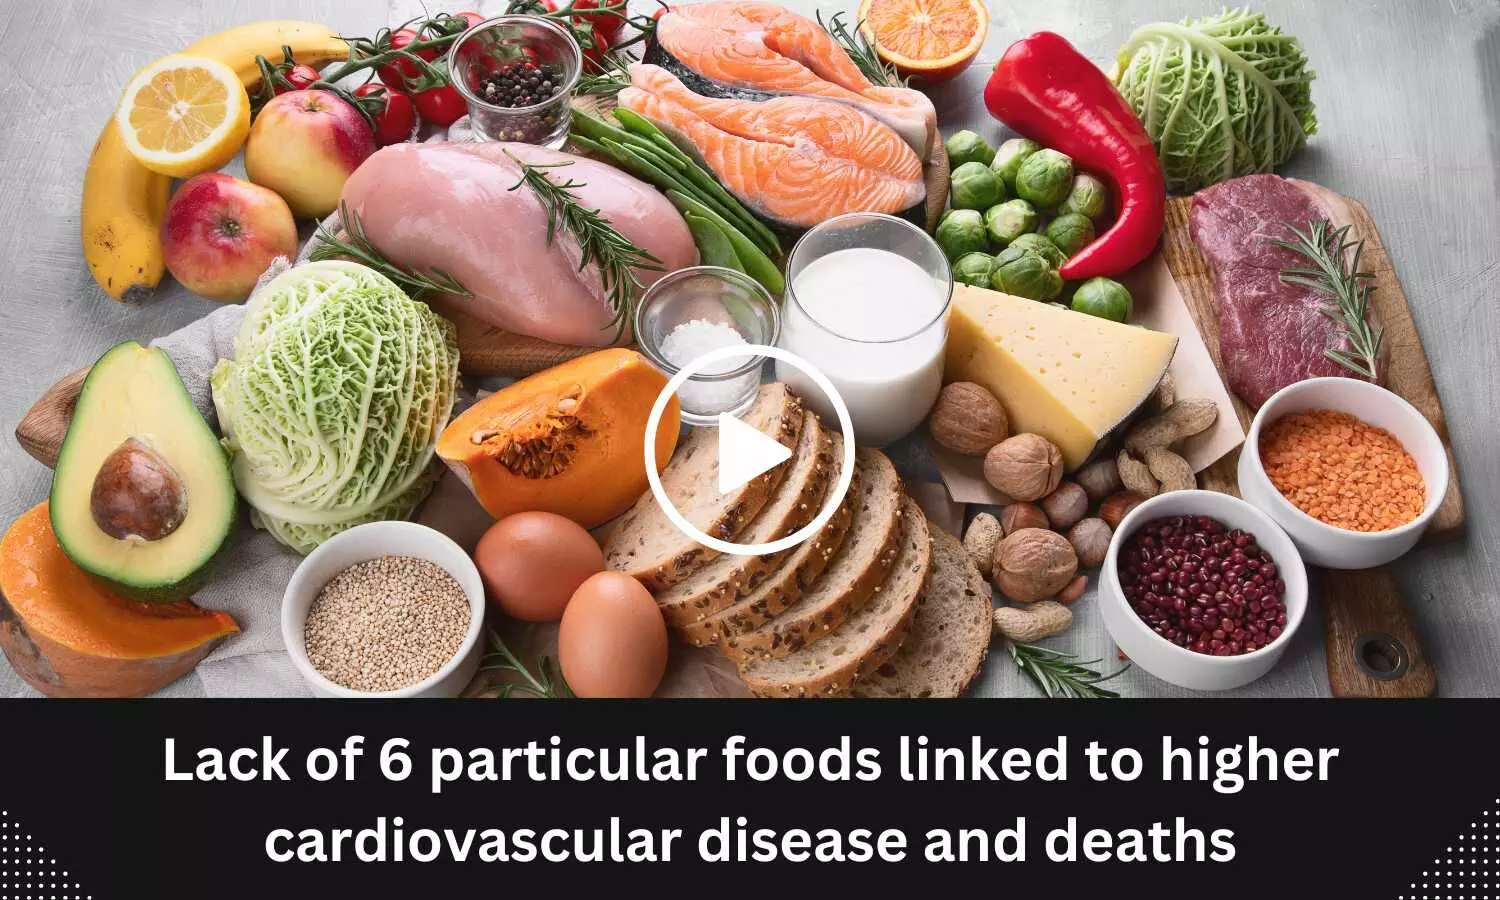 Lack of 6 particular foods linked to higher cardiovascular disease and deaths